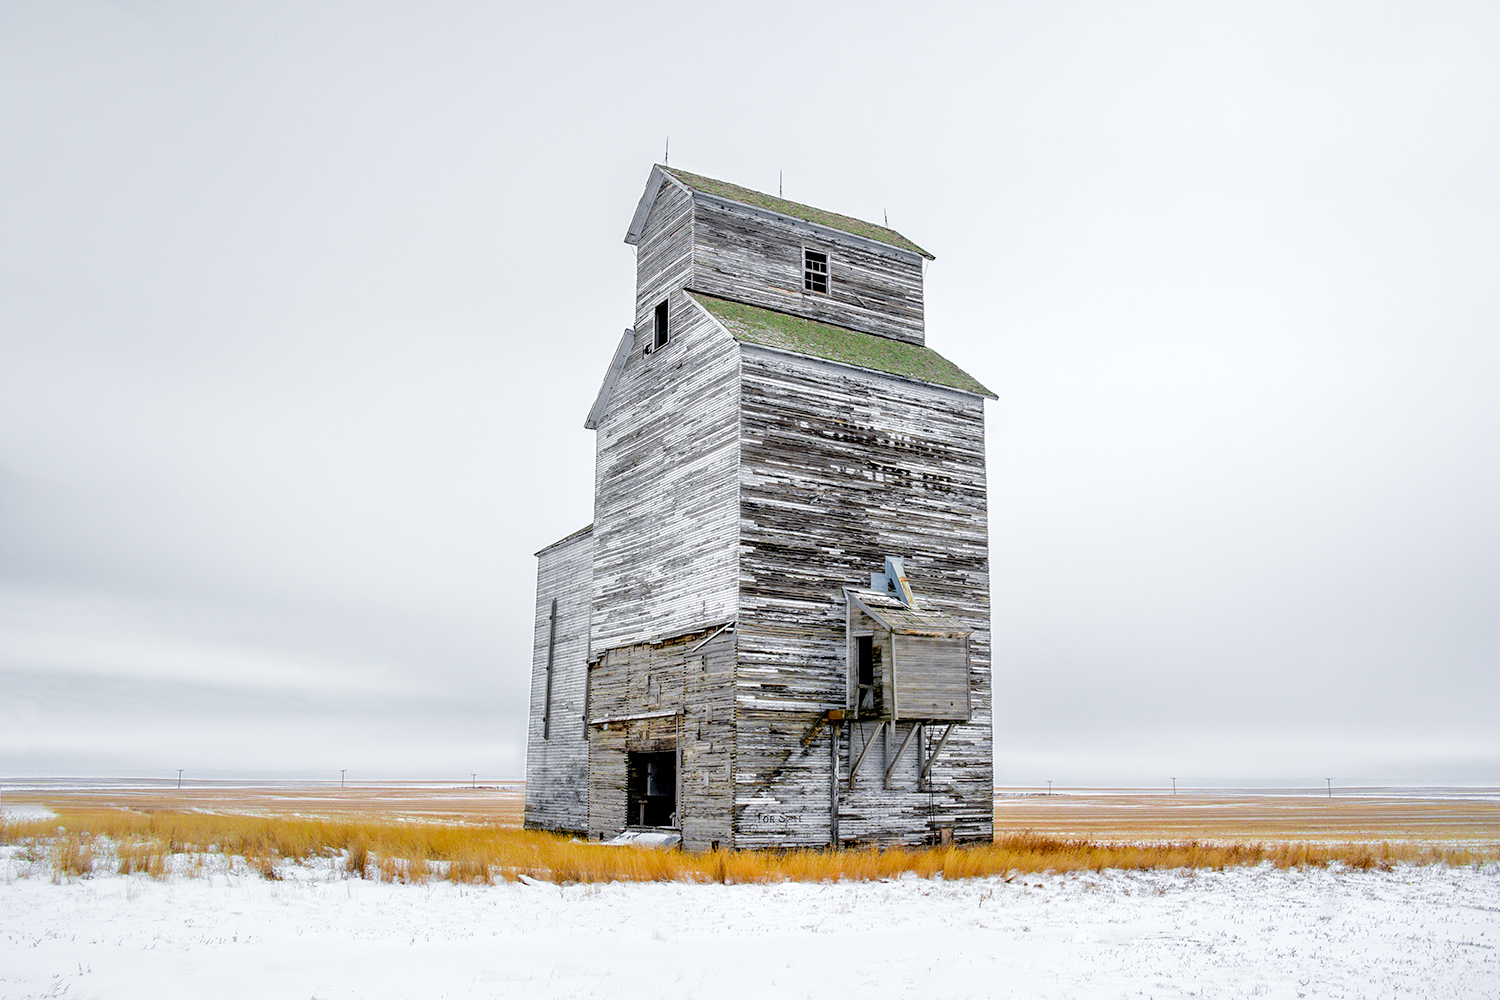 An old grain elevator stands watch over the cold, snow-covered Montana plains outside of the small town of Rudyard. It was -22 degrees Fahrenheit on the morning this photograph was taken. Just another day on the Hi-Line.&nbsp; &nbsp;→ Buy This Print